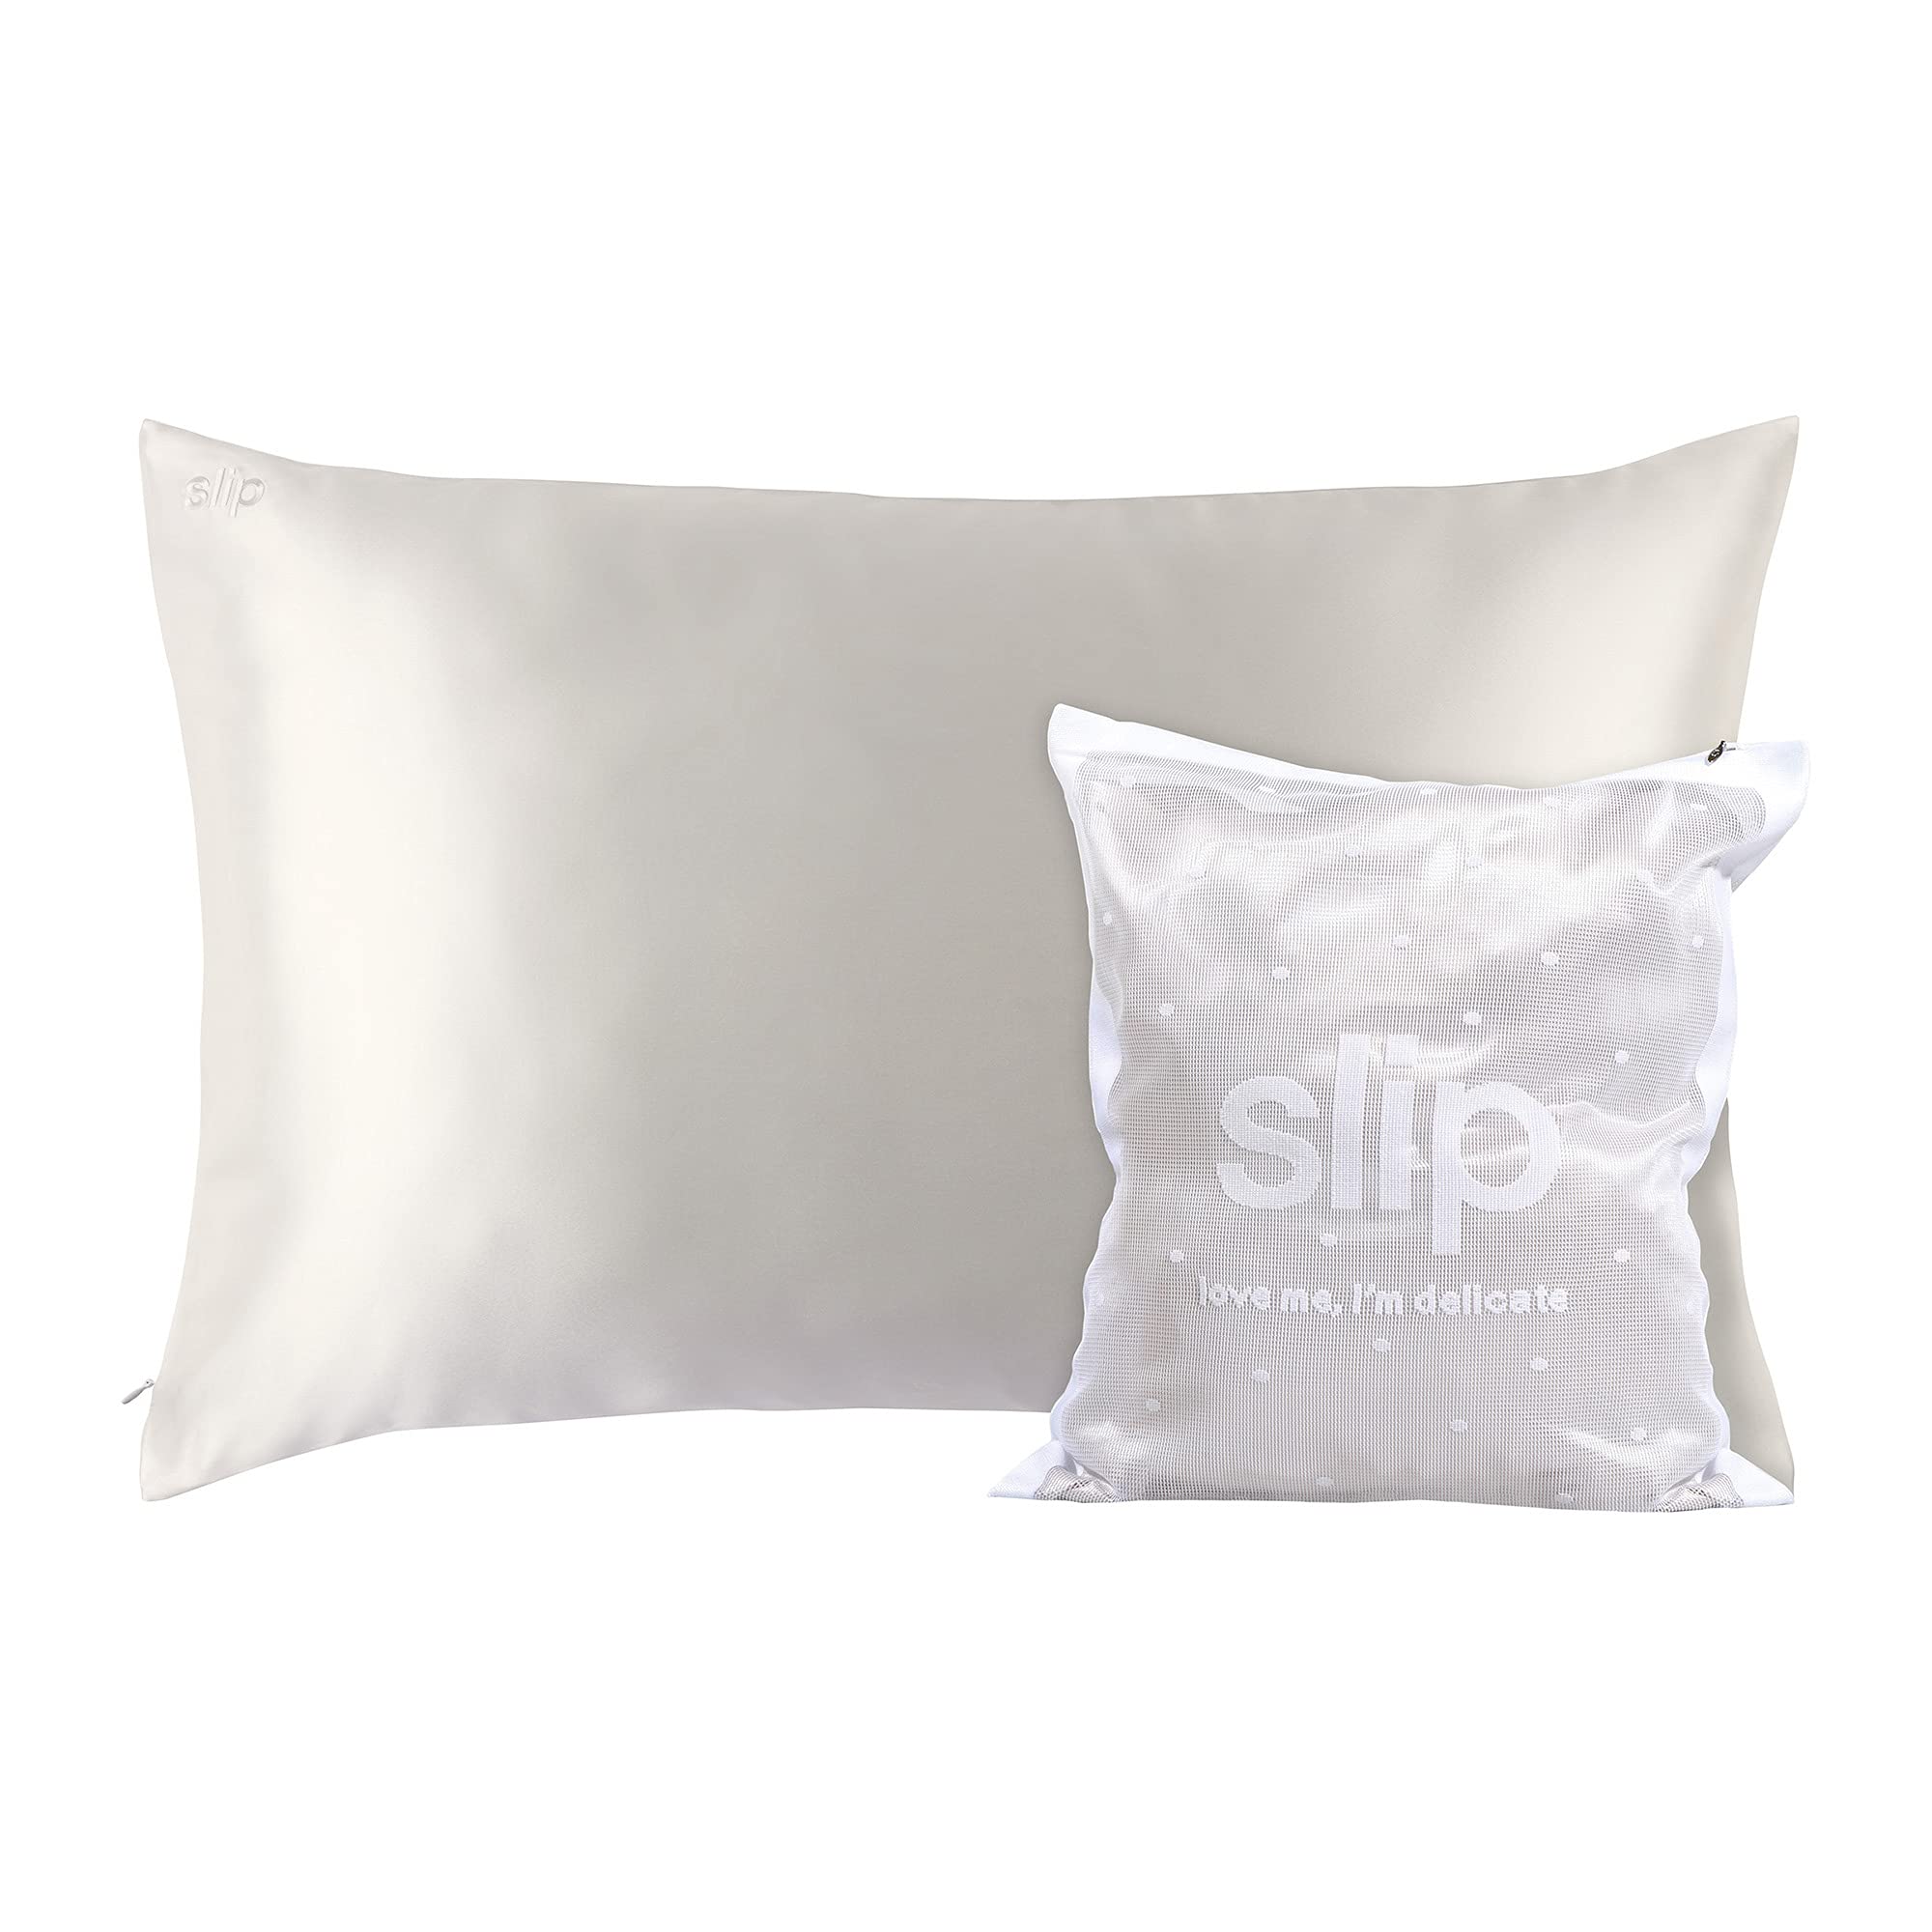 Slip Silk Love Me I'm Delicate Gift Set in White - Includes One Queen Size 100% Pure 22 Momme Mulberry Silk Pillowcase and Wash Bag - Anti-Agin...